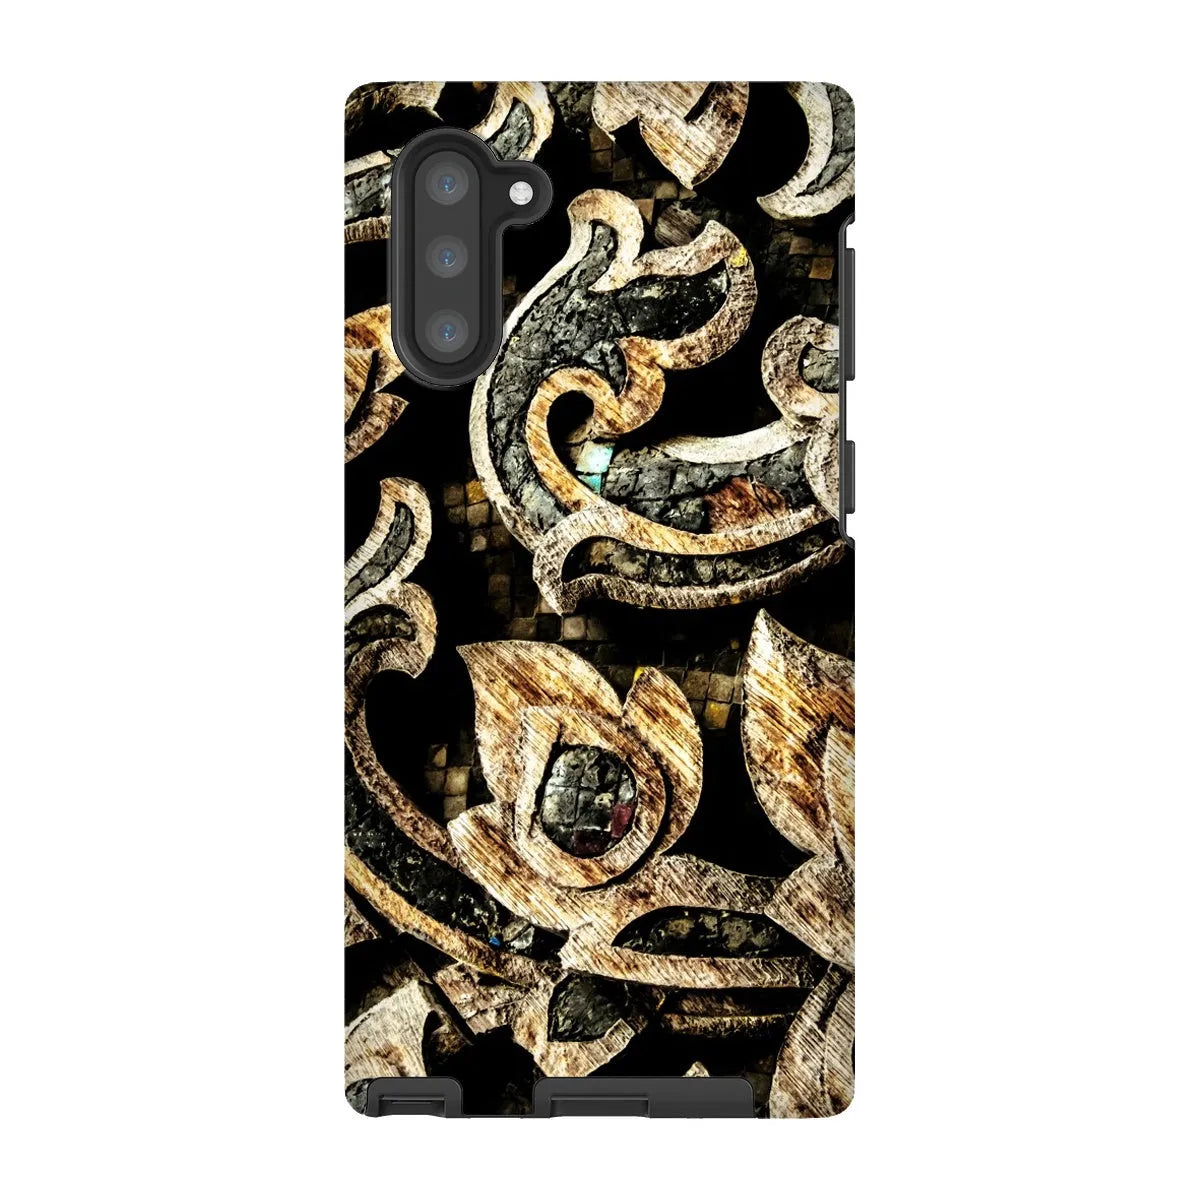 Against The Grain Tough Phone Case - Samsung Galaxy Note 10 / Matte - Mobile Phone Cases - Aesthetic Art